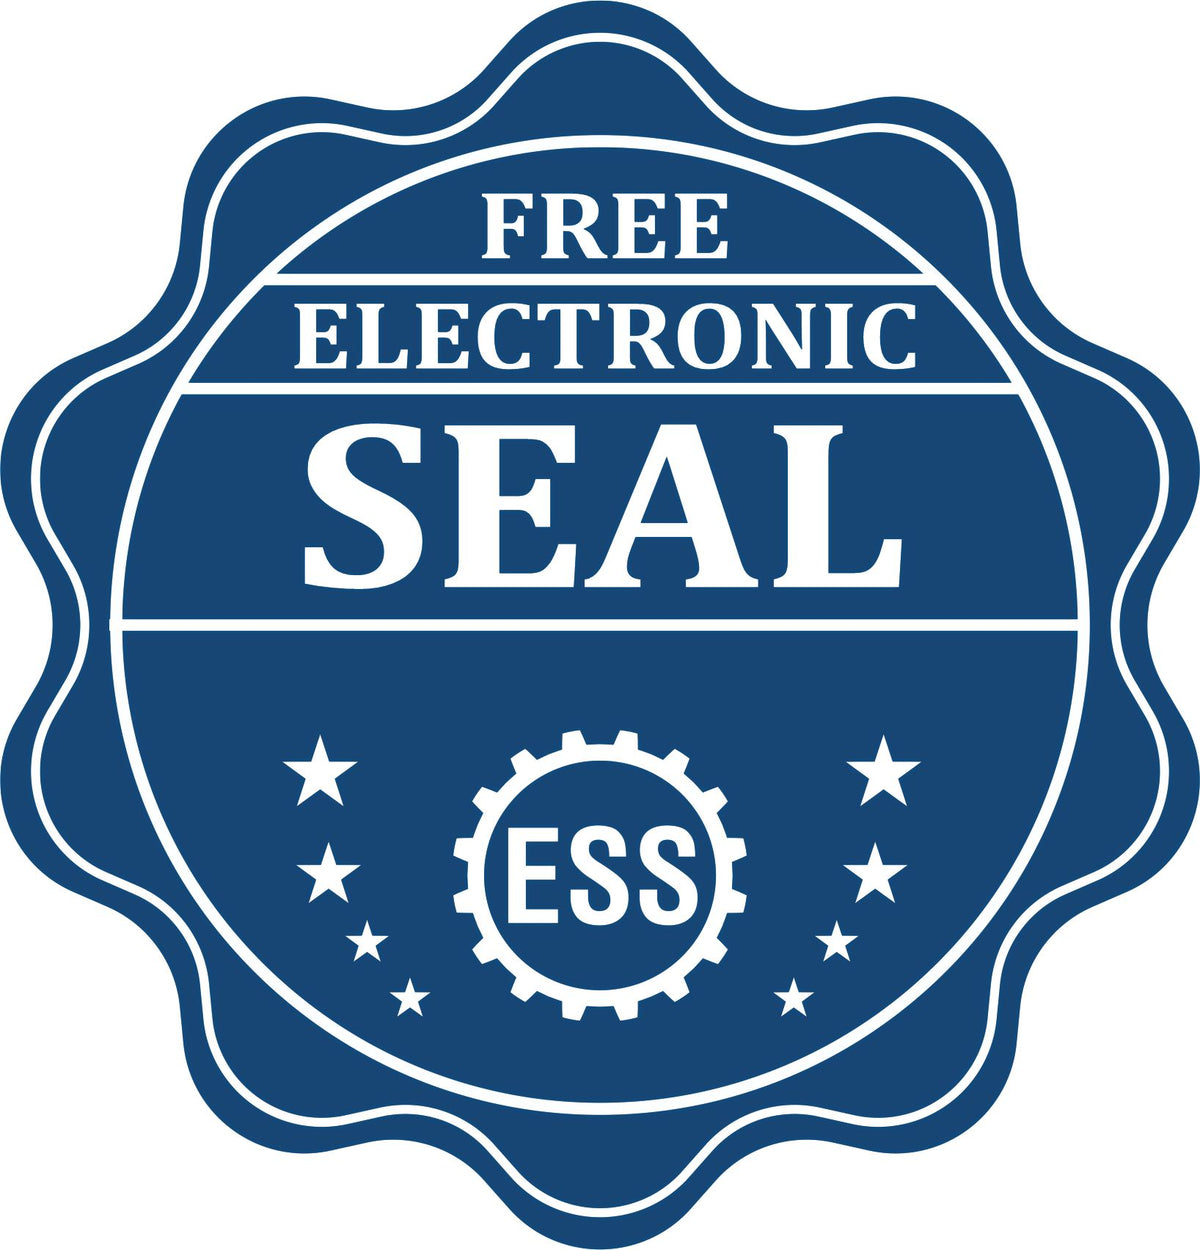 A badge showing a free electronic seal for the Hybrid Guam Land Surveyor Seal with stars and the ESS gear on the emblem.